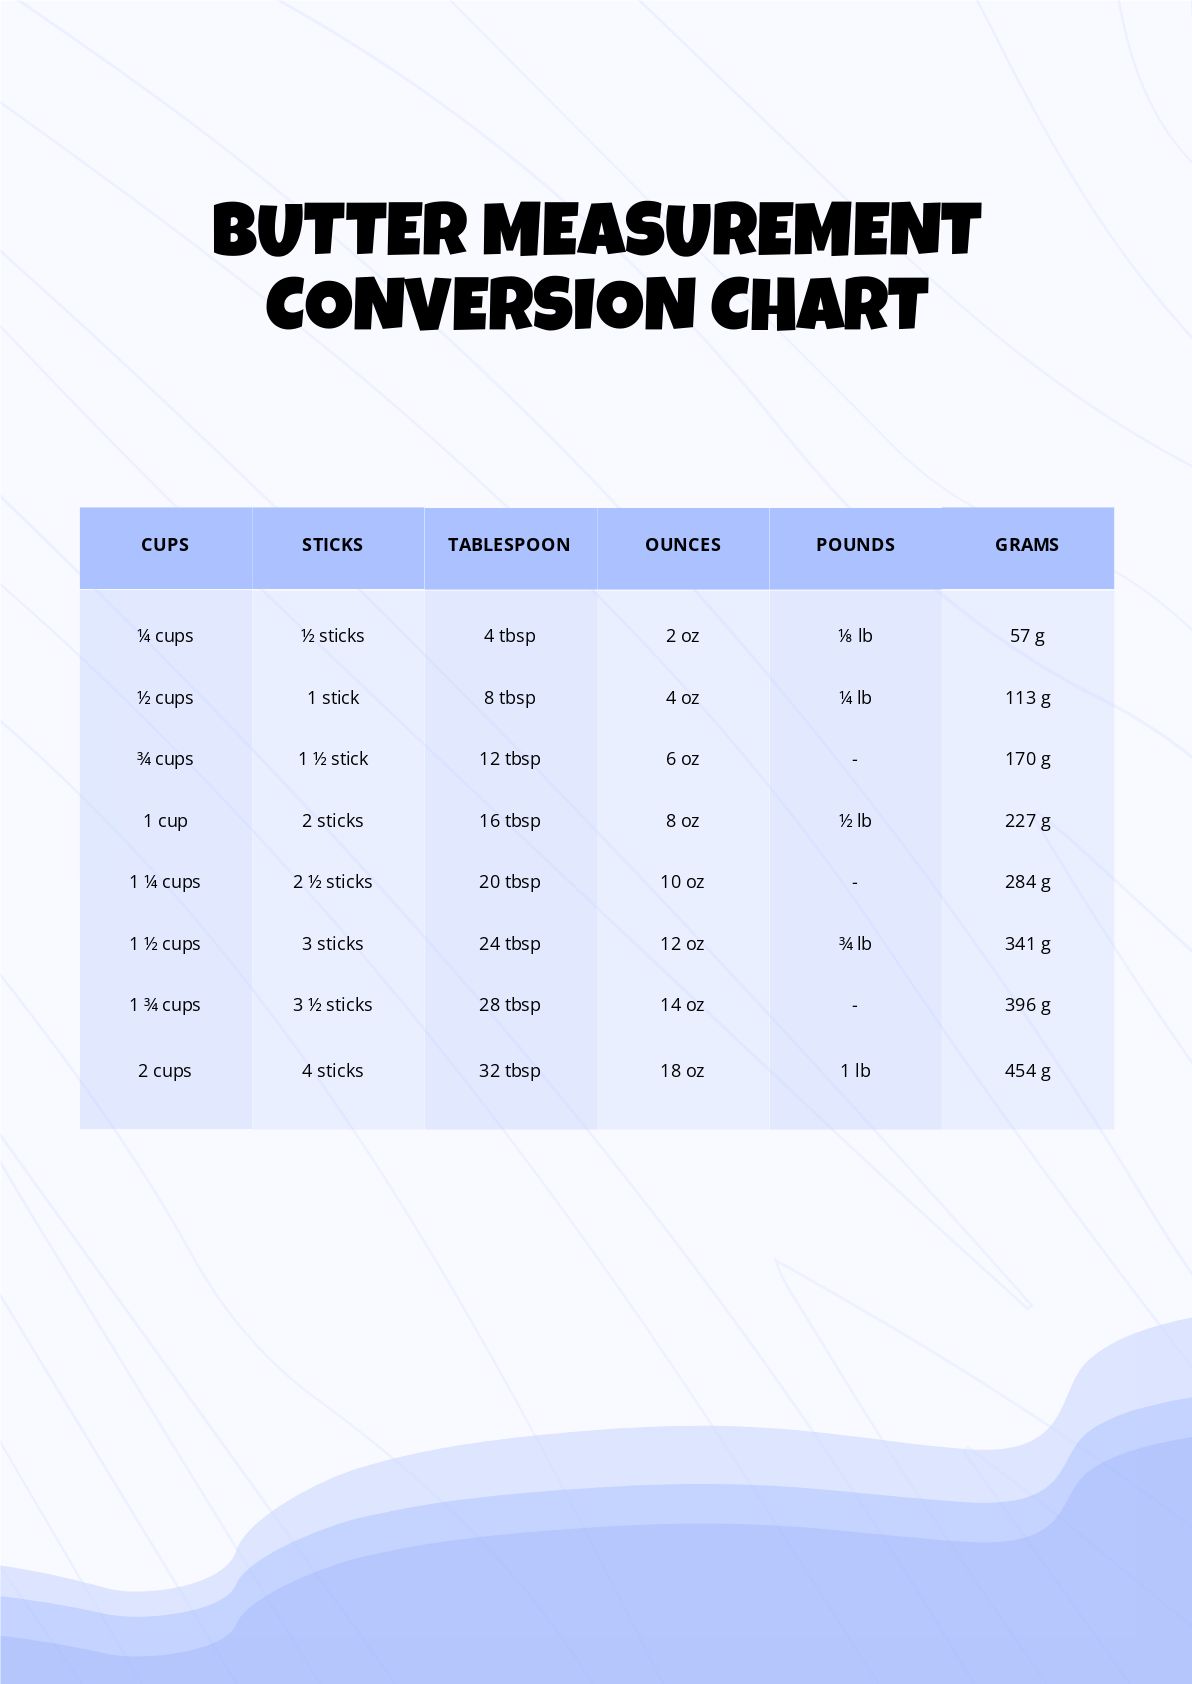 free-butter-measurement-conversion-chart-download-in-pdf-template